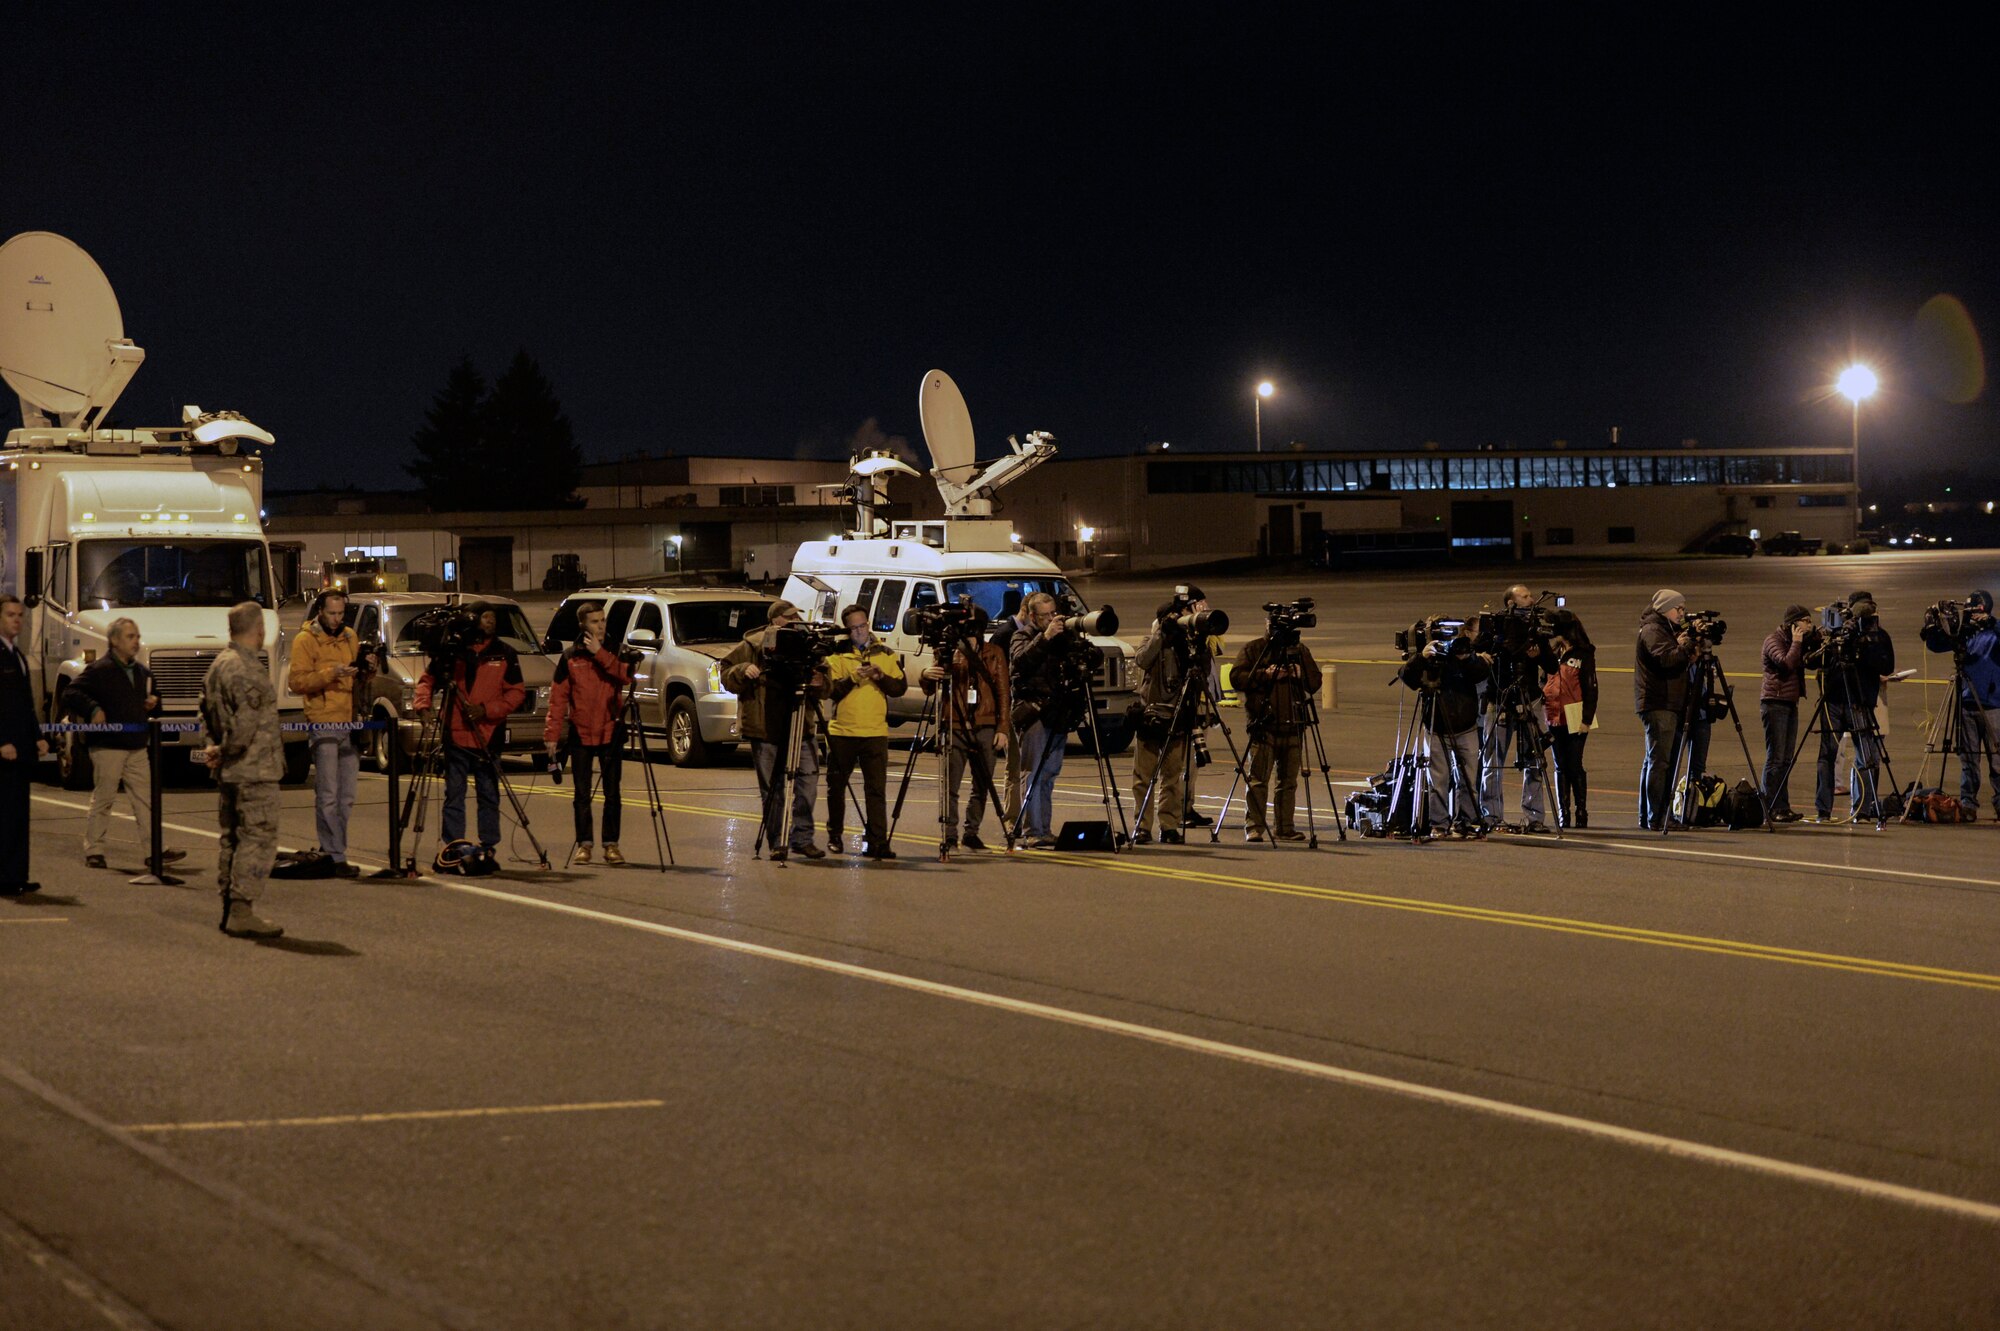 Camera crews and reporters from numerous new agencies await the arrival of Kenneth Bae and Matthew Miller, the last two American citizens imprisoned in North Korea Nov. 8th, 2014, at Joint Base Lewis-McChord, Wash. Bae and Miller were released by North Korean leader, Kim Jong Un and brought to JBLM to be re-united with their families. (U.S. Air Force photo/Staff Sgt. Russ Jackson)